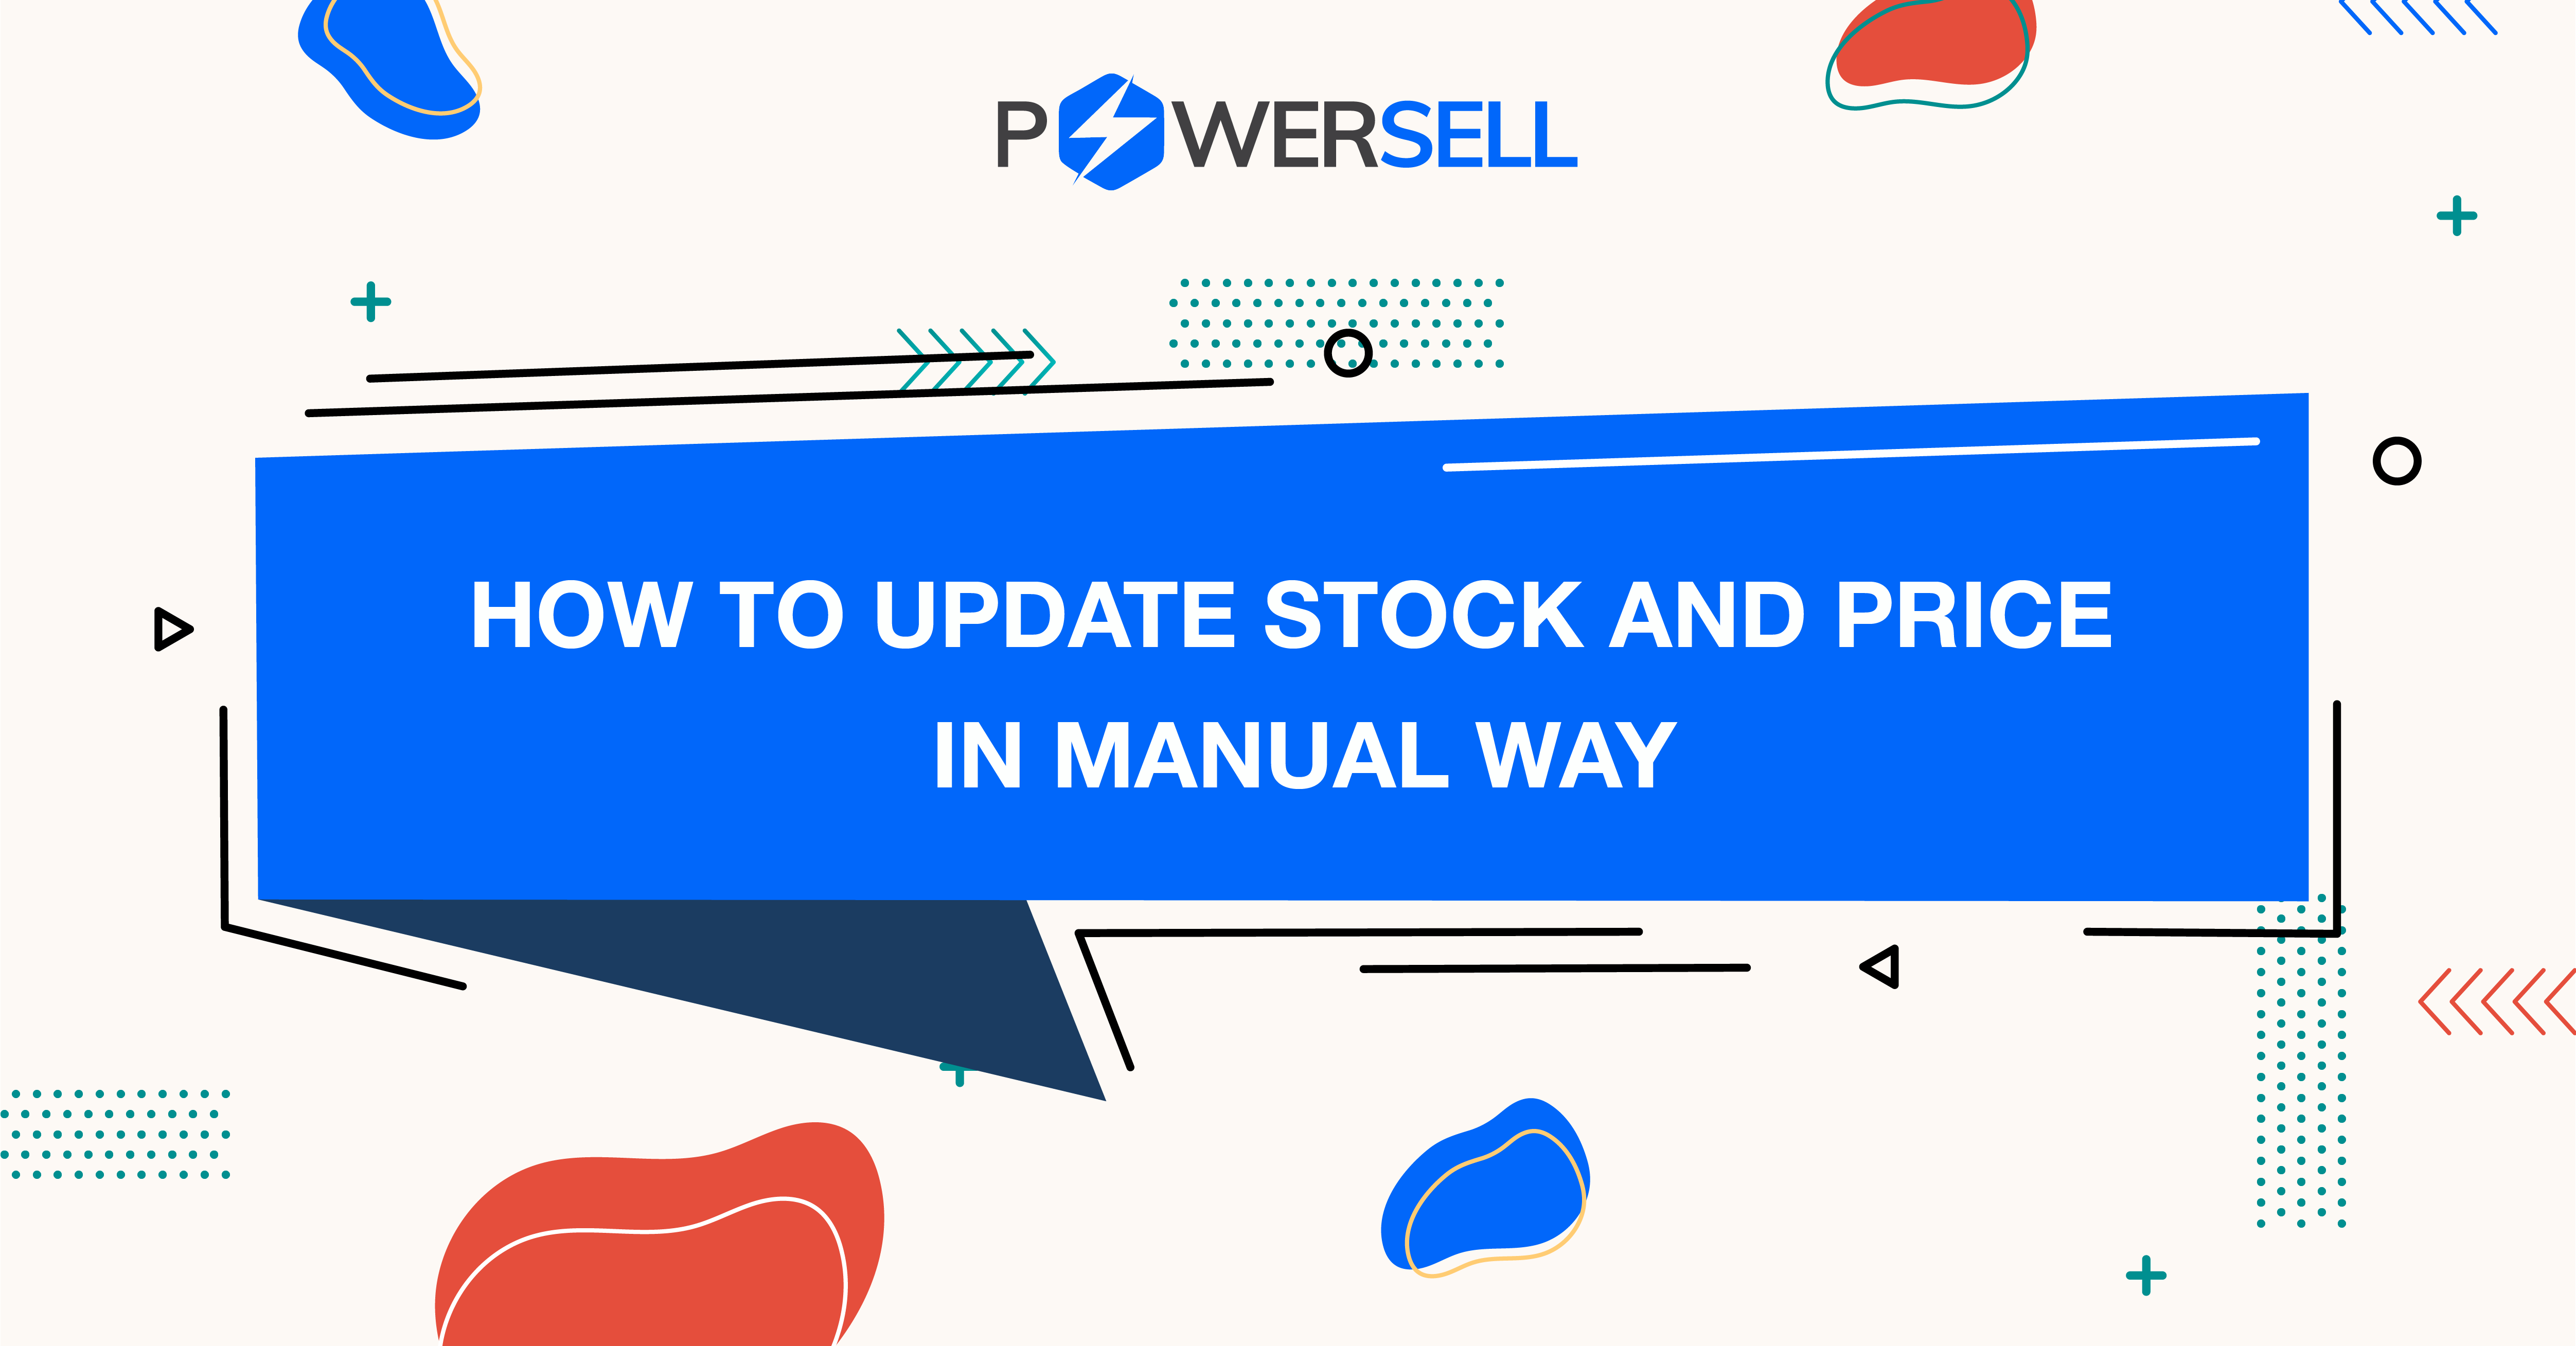 How to update stock and price in manual way